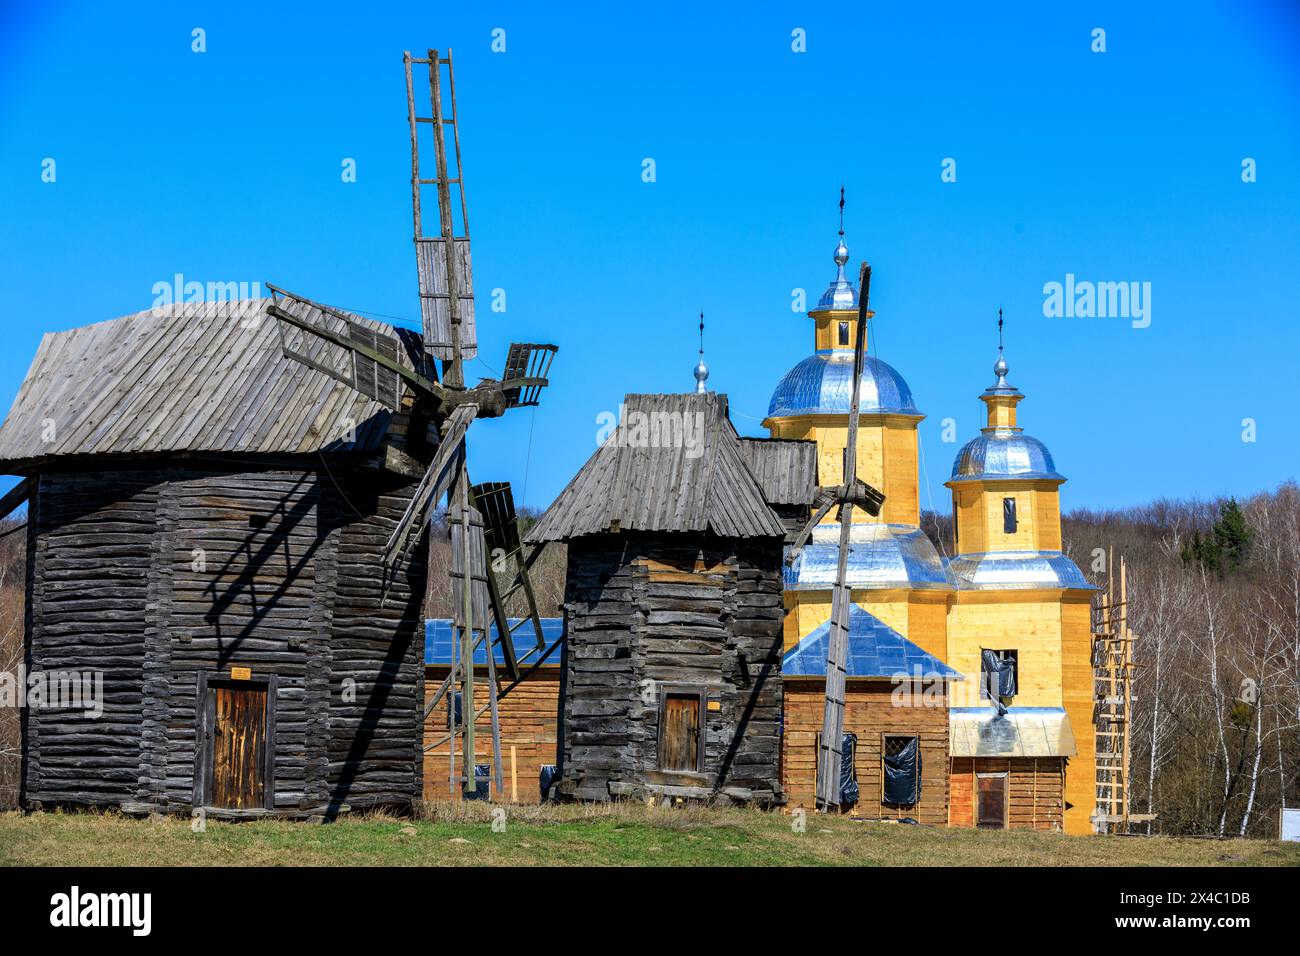 Ukraine, Kiev, Kyiv. Pyrohiv, also Pirogov, a village south of Kiev. Now home to an outdoor Museum of Folk Architecture and Life of Ukraine. Wooden Windmills. Stock Photo